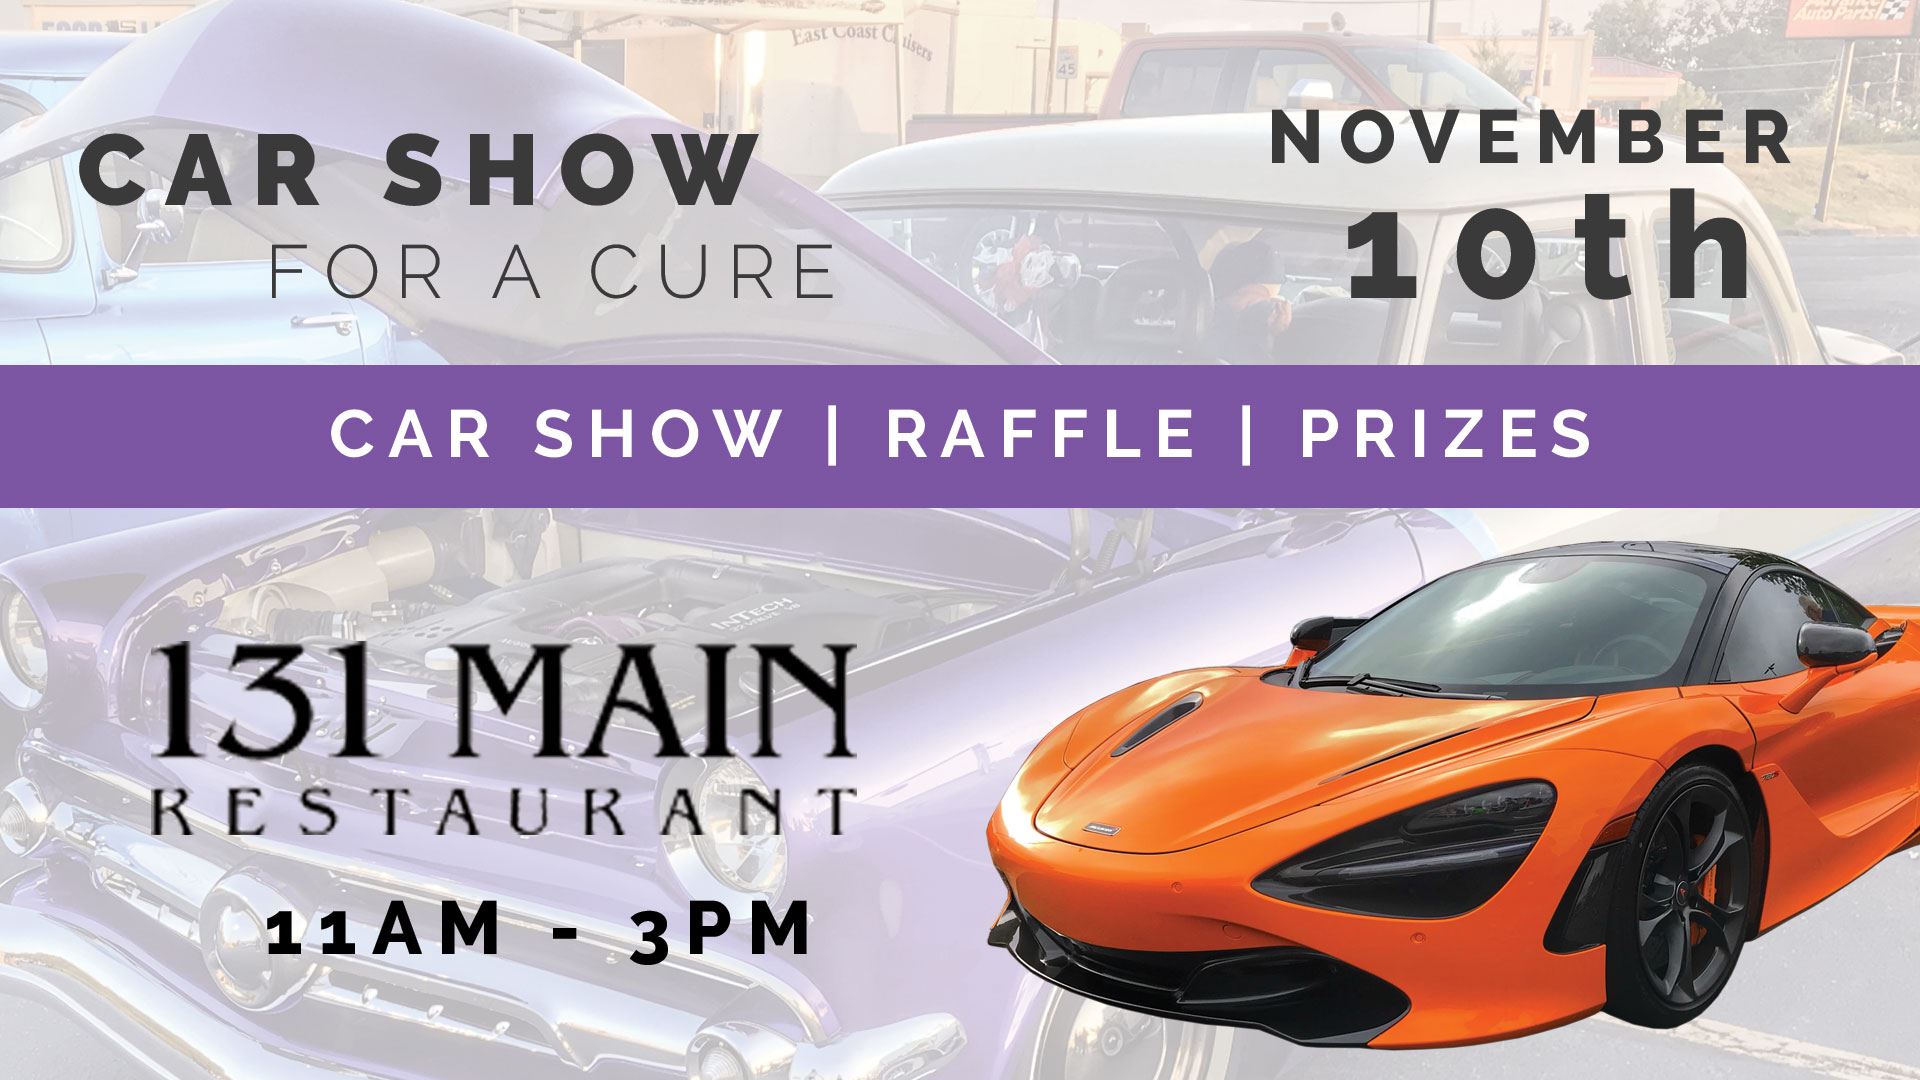 Car Show For A Cure - November 10th